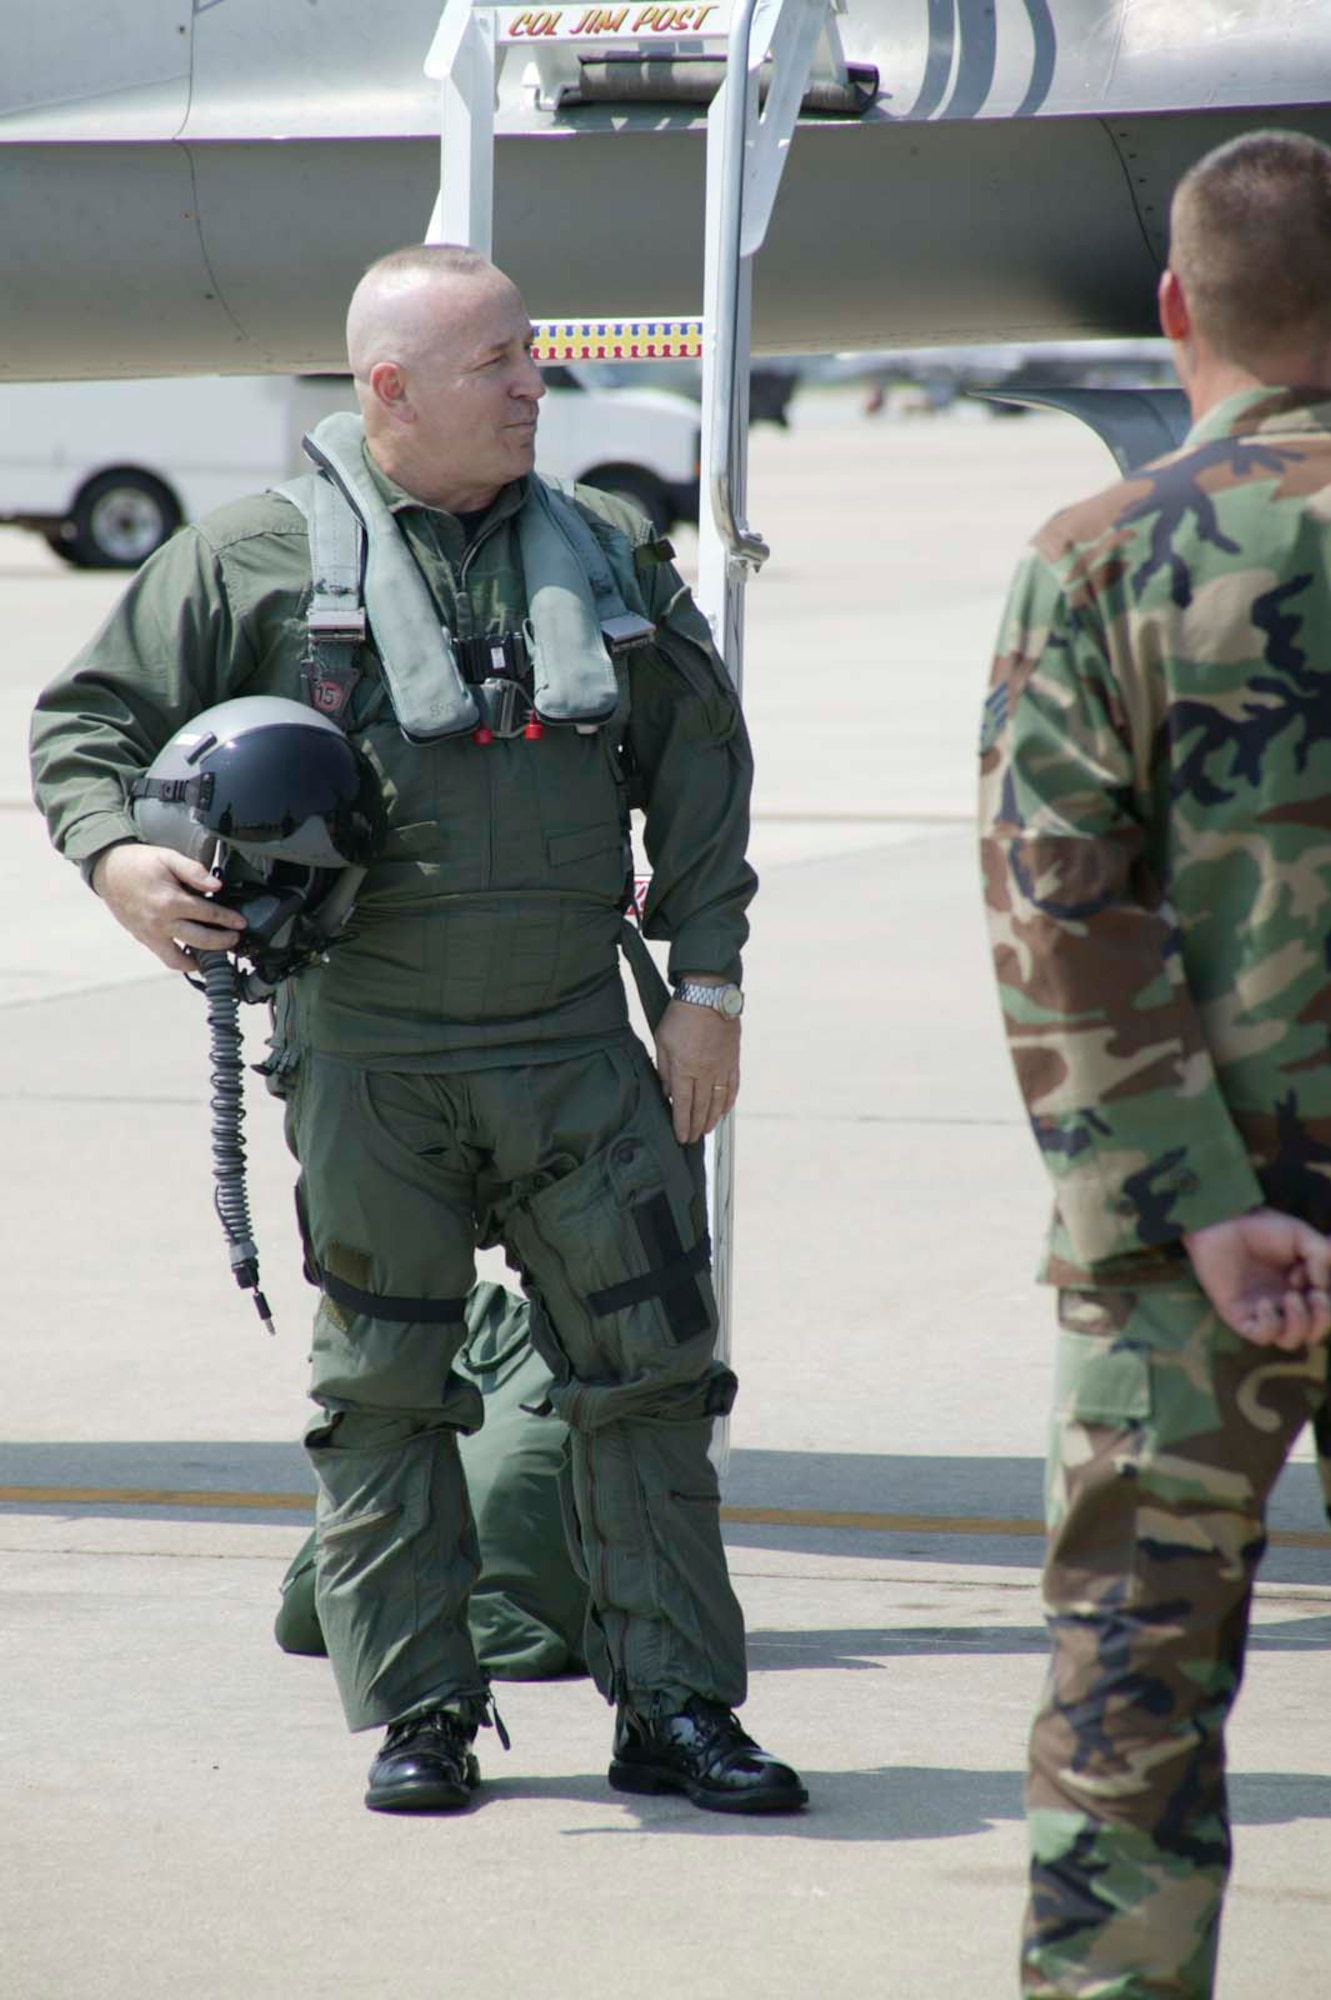 SHAW AIR FORCE BASE, S.C. -- Chief Master Sgt. Gary Rutledge, 20th Fighter Wing command chief, prepares to step to an F-16 for his final flight flown by Col. James Post, 20th FW commander July 6. Chief Rutledge is retiring after 30 years of service. (U.S. Air Force photo/Senior Airman Holly MacDonald)